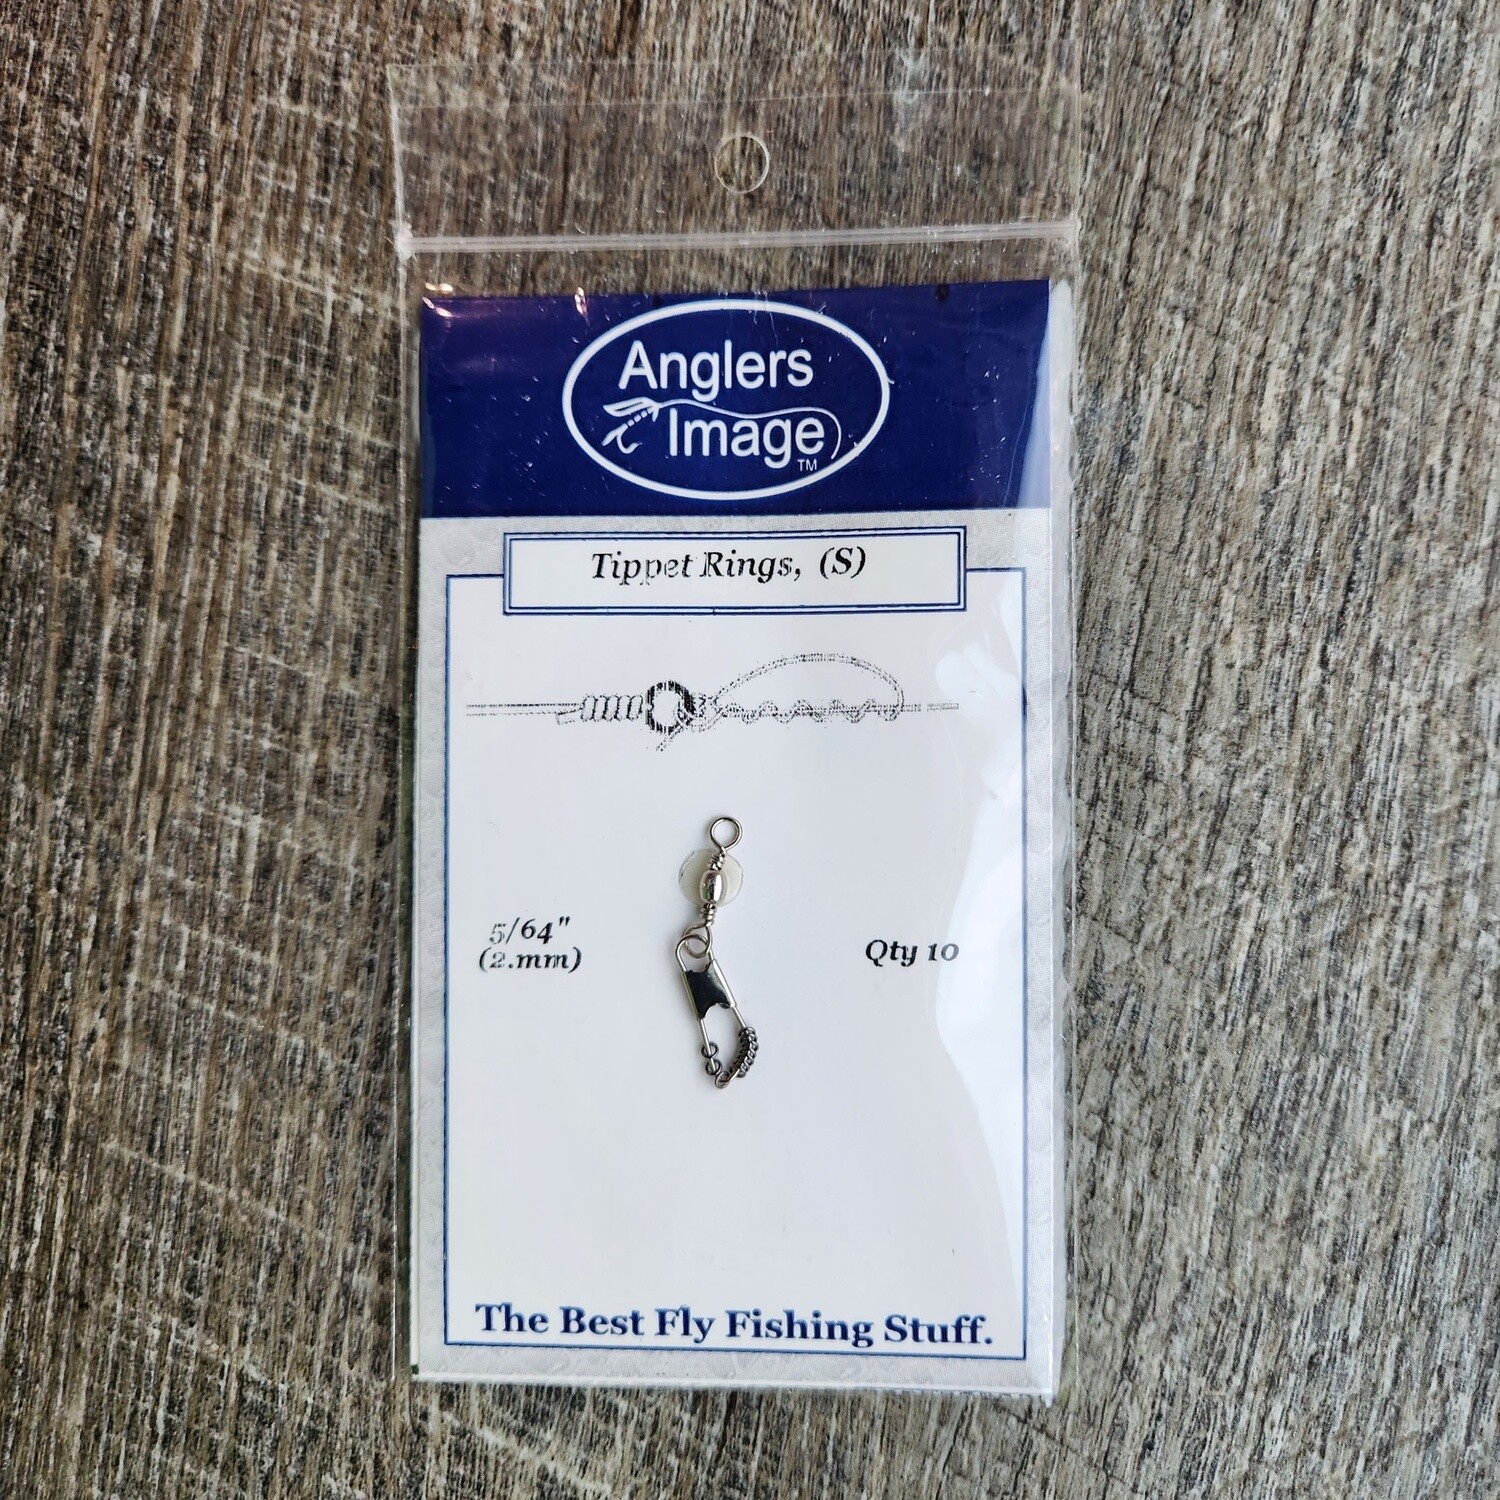 ANGLERS IMAGE TIPPET RINGS